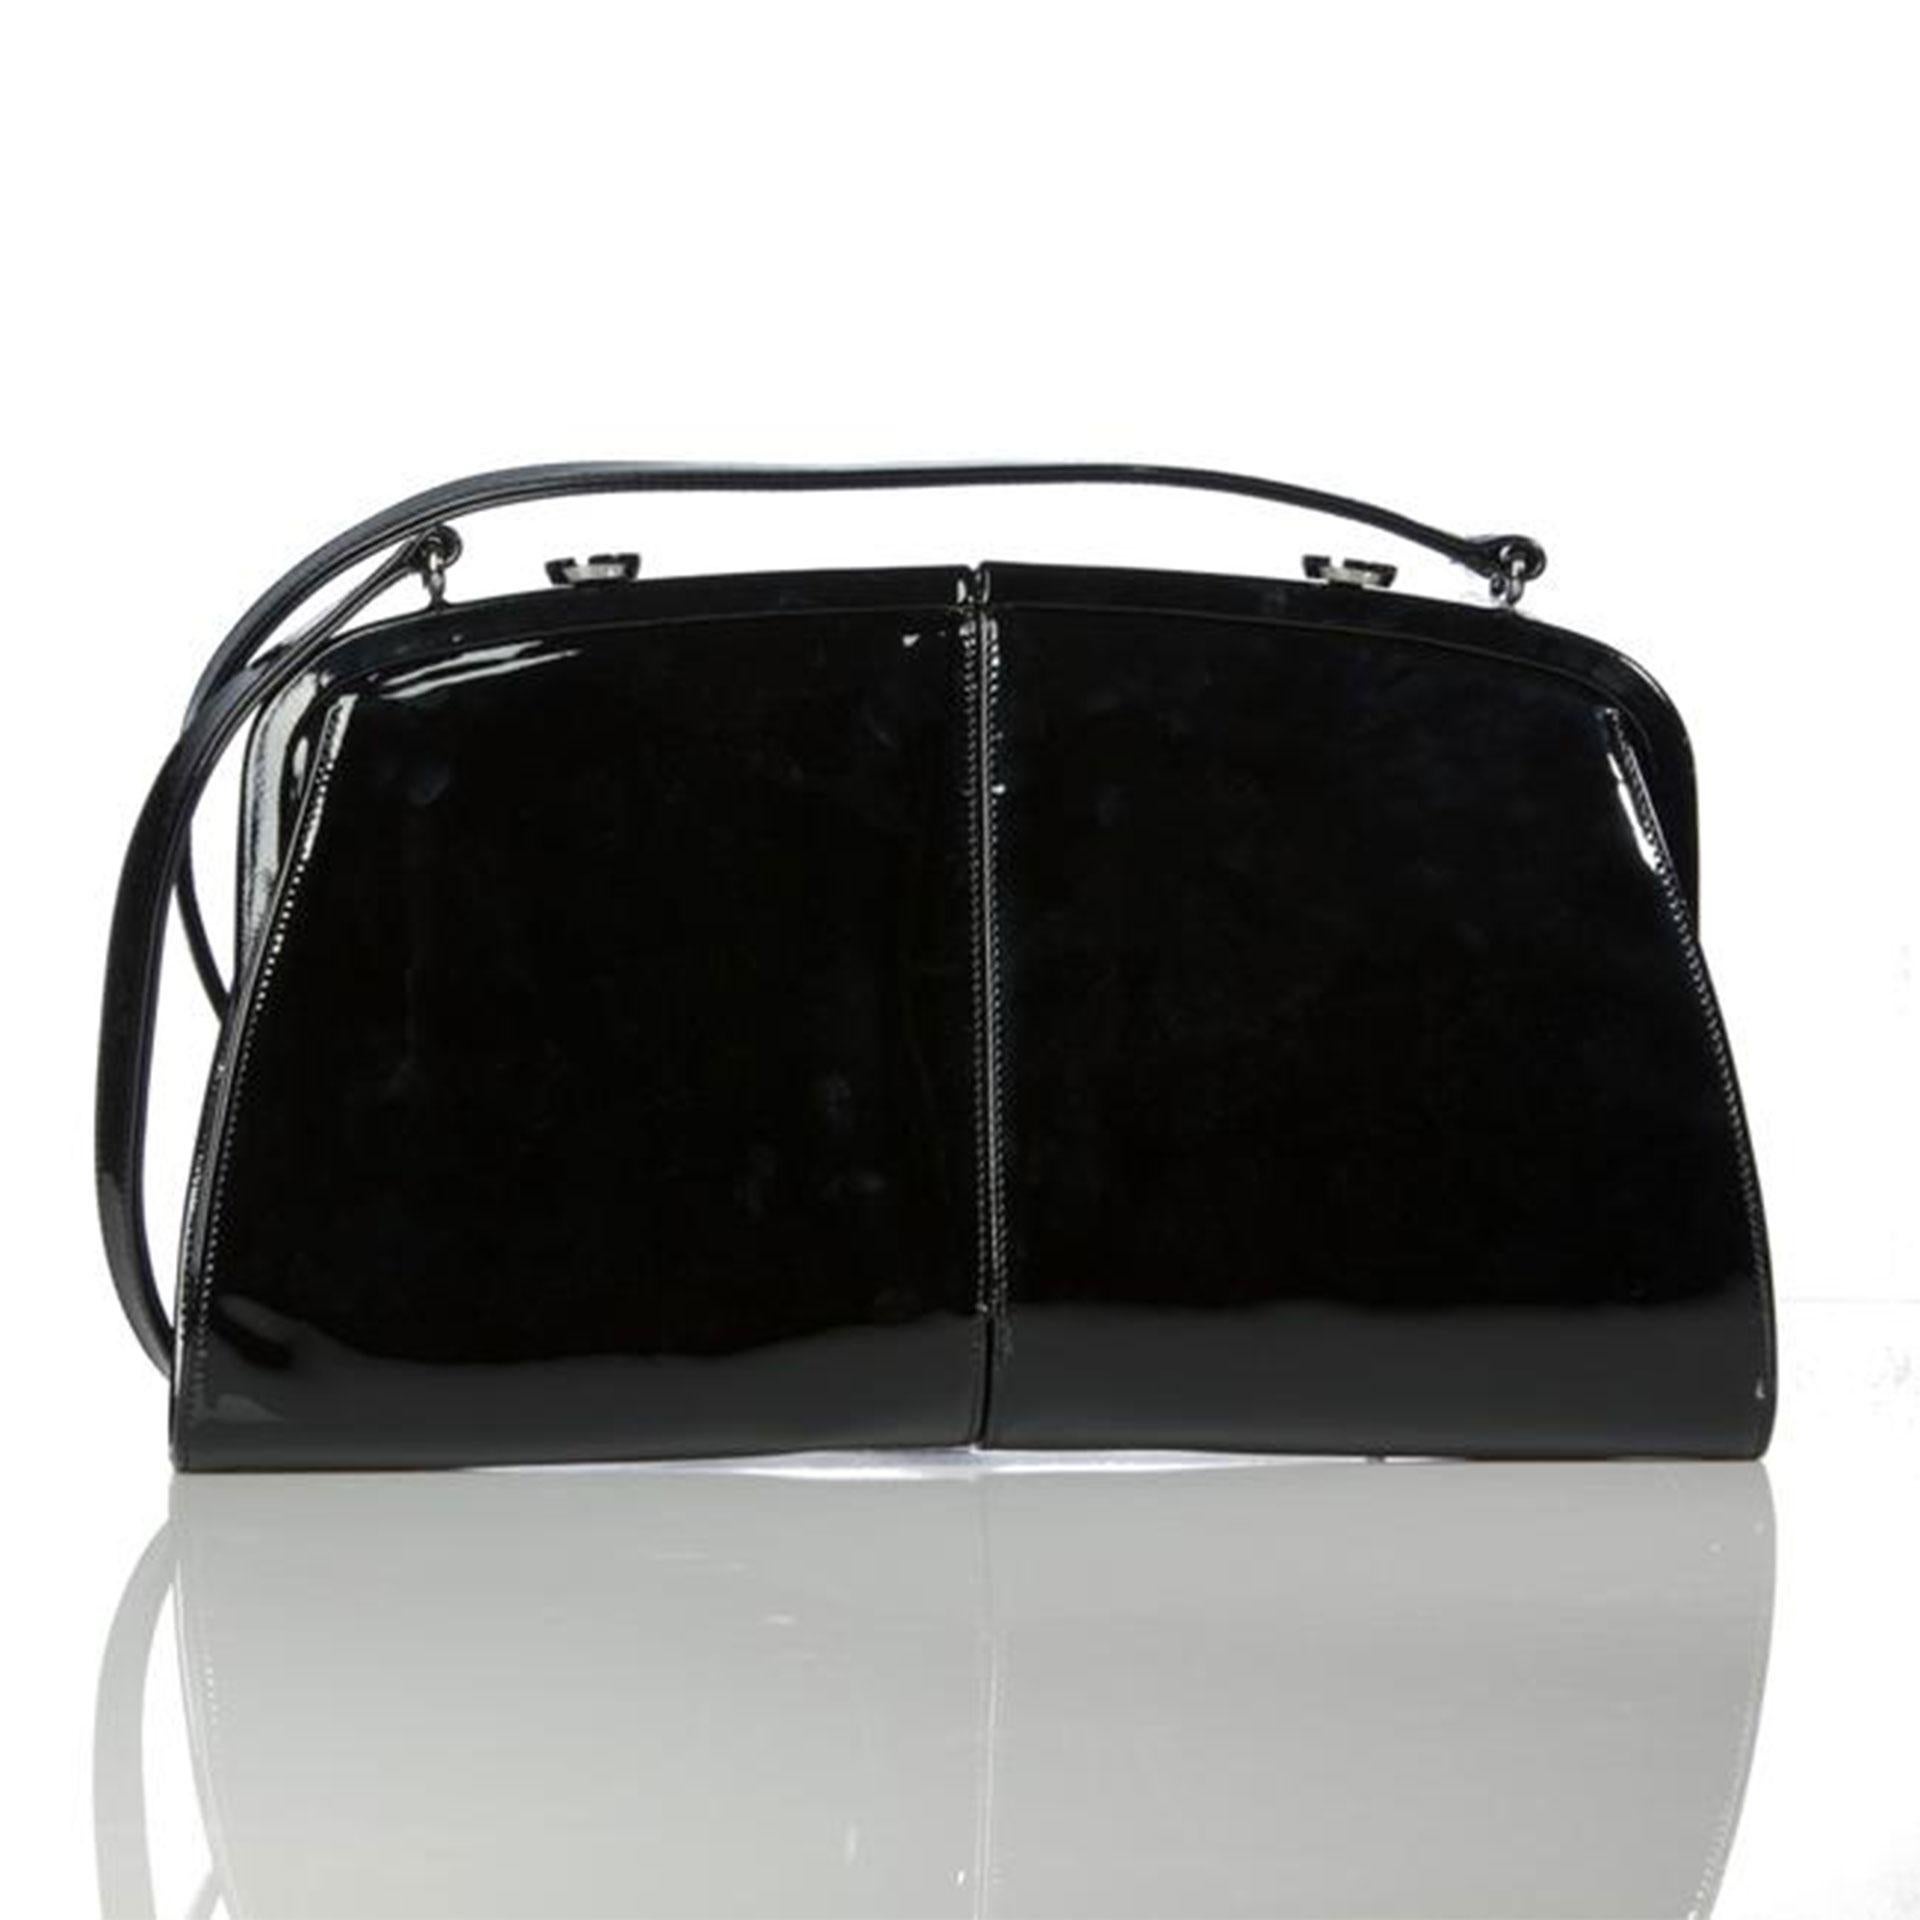 Chanel 2007 Double Twin Split Frame Runway Black Patent Leather Cross Body Bag For Sale 4